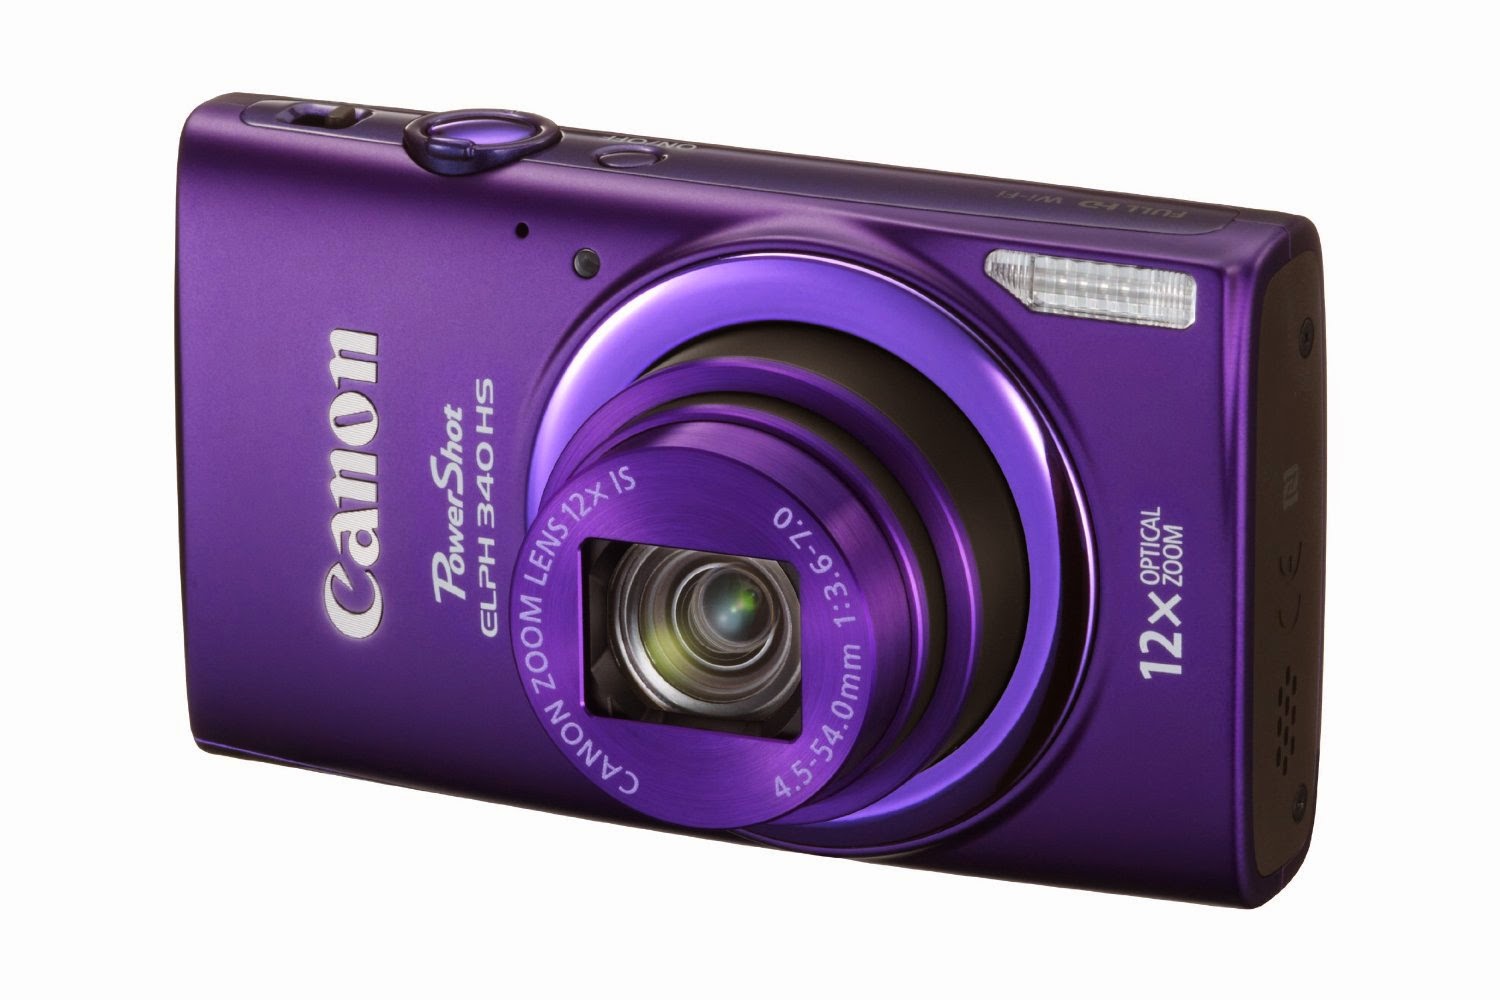 Canon PowerShot ELPH 340 HS 16 MP Digital Camera, purple, review, ultra compact slim lightweight point and shoot digital camera with image stabilization